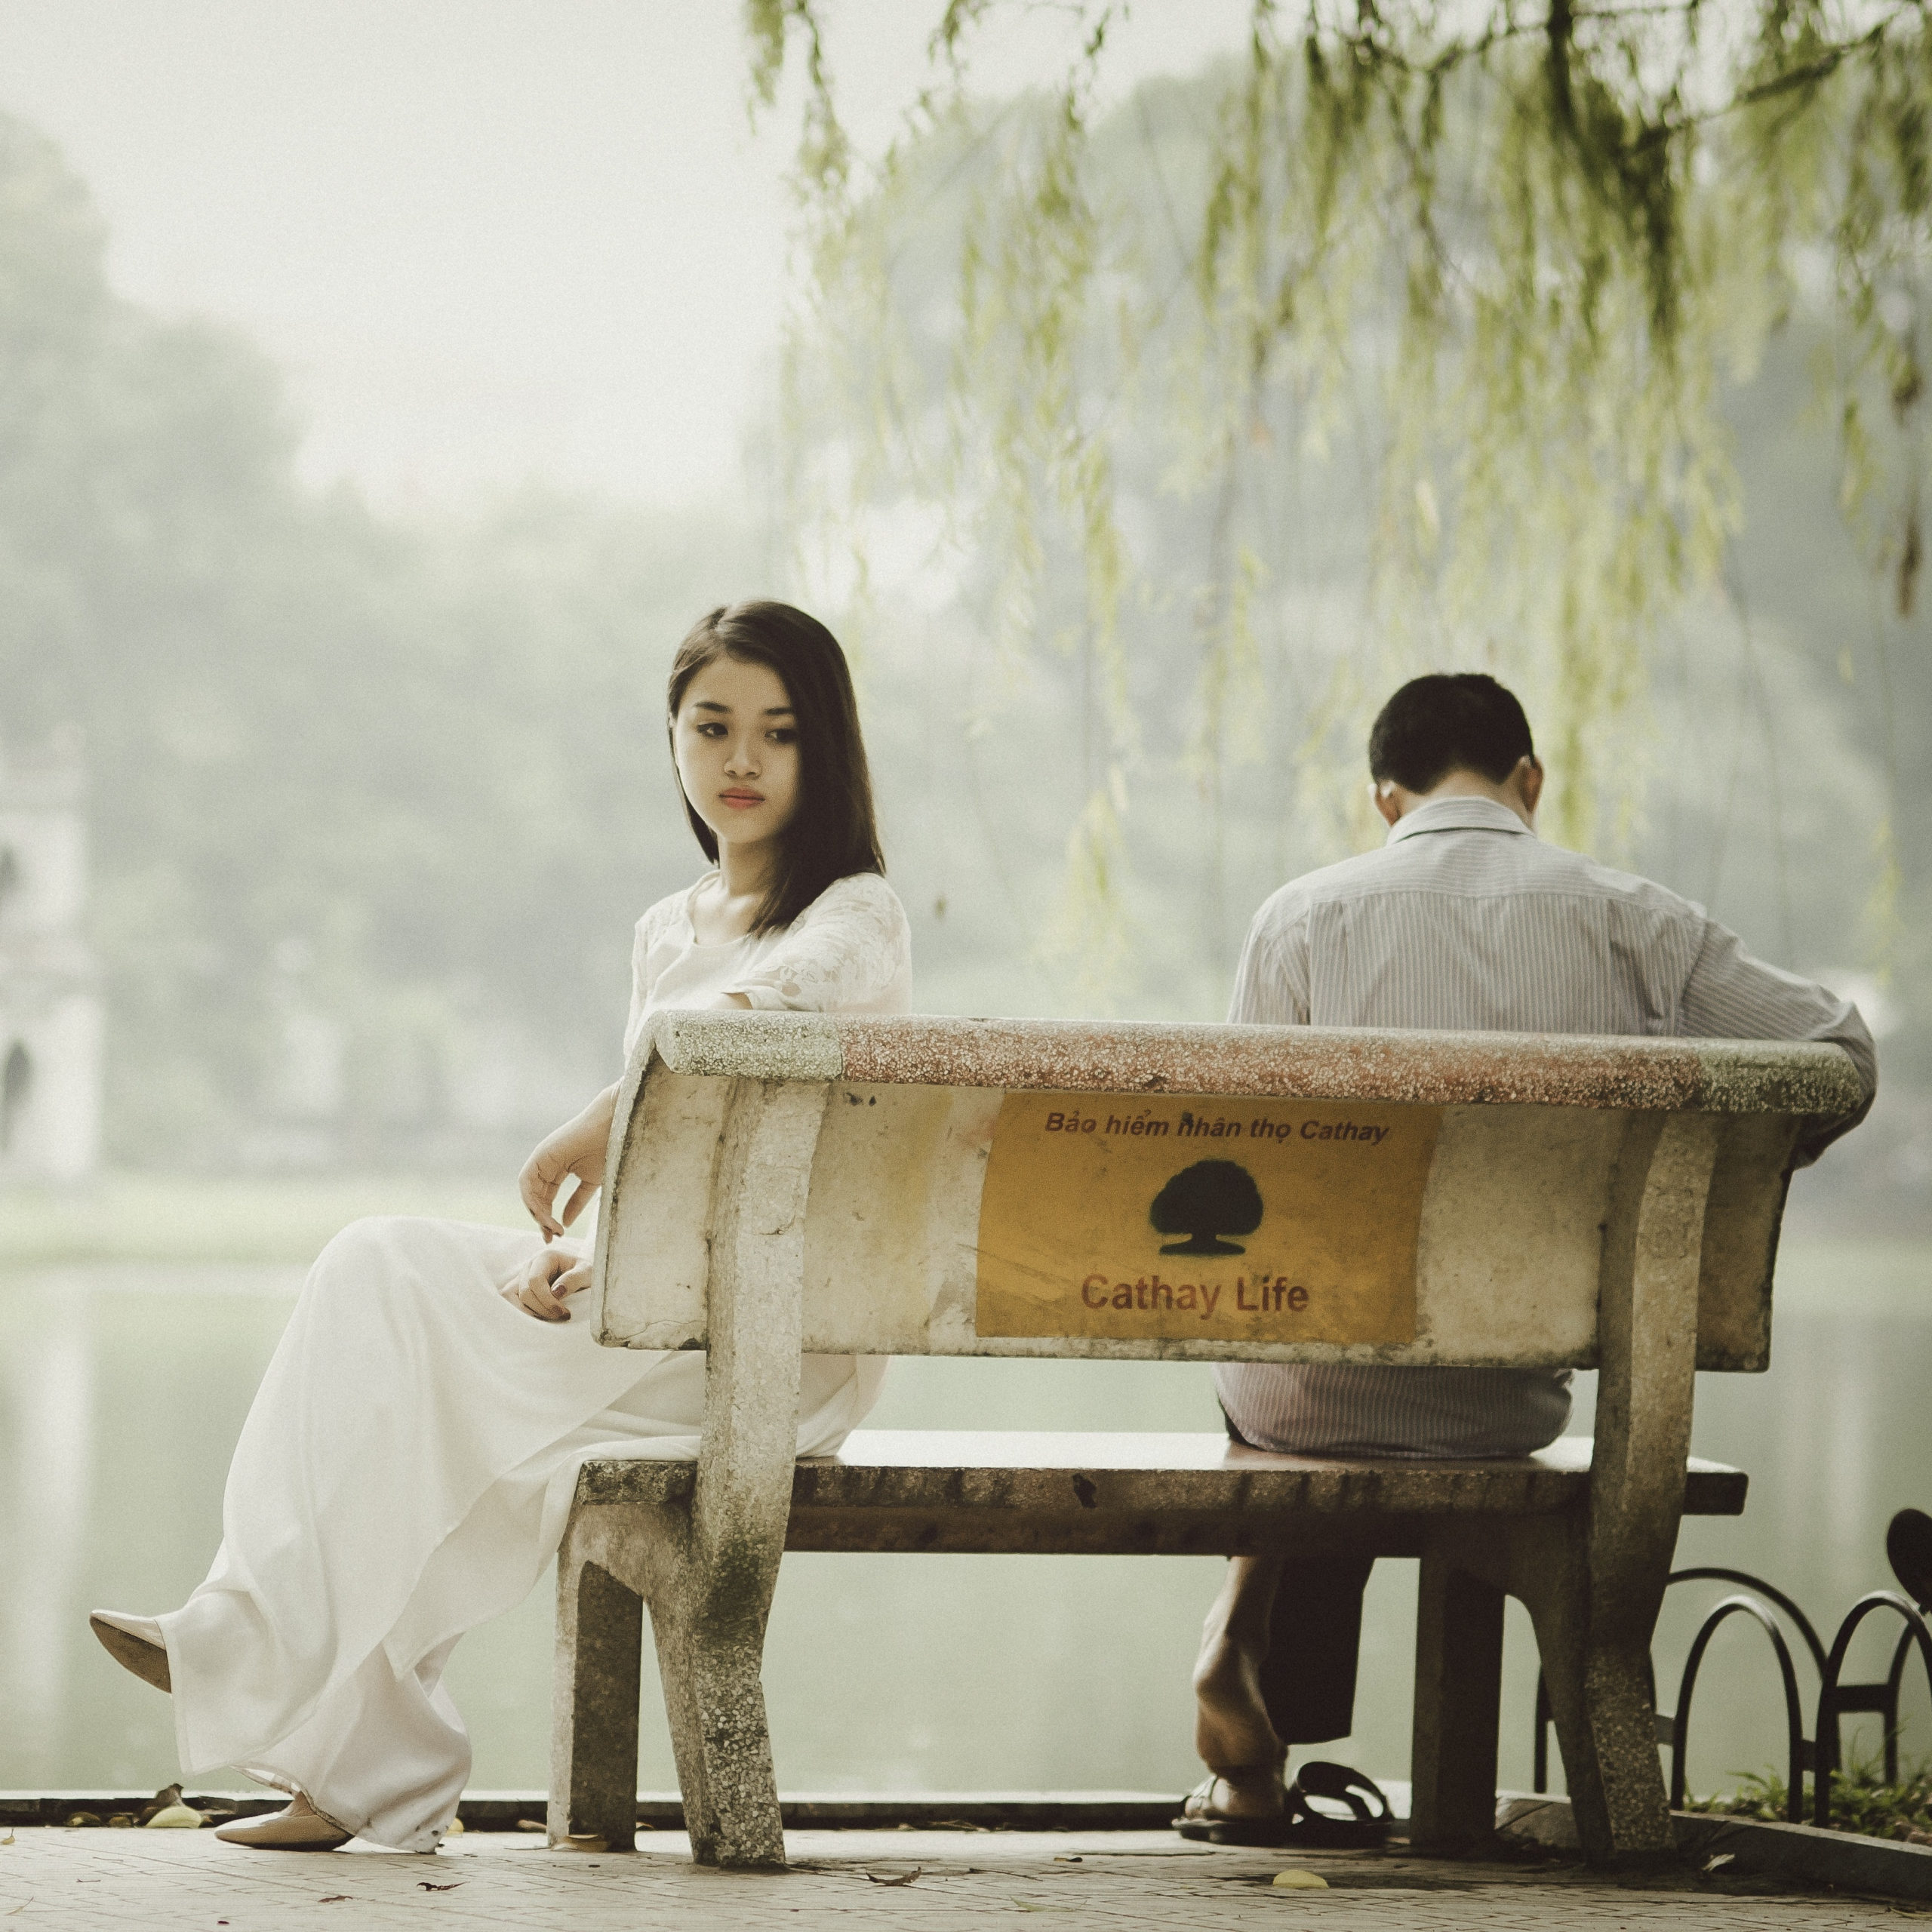 man and woman sitting on a bench arguing